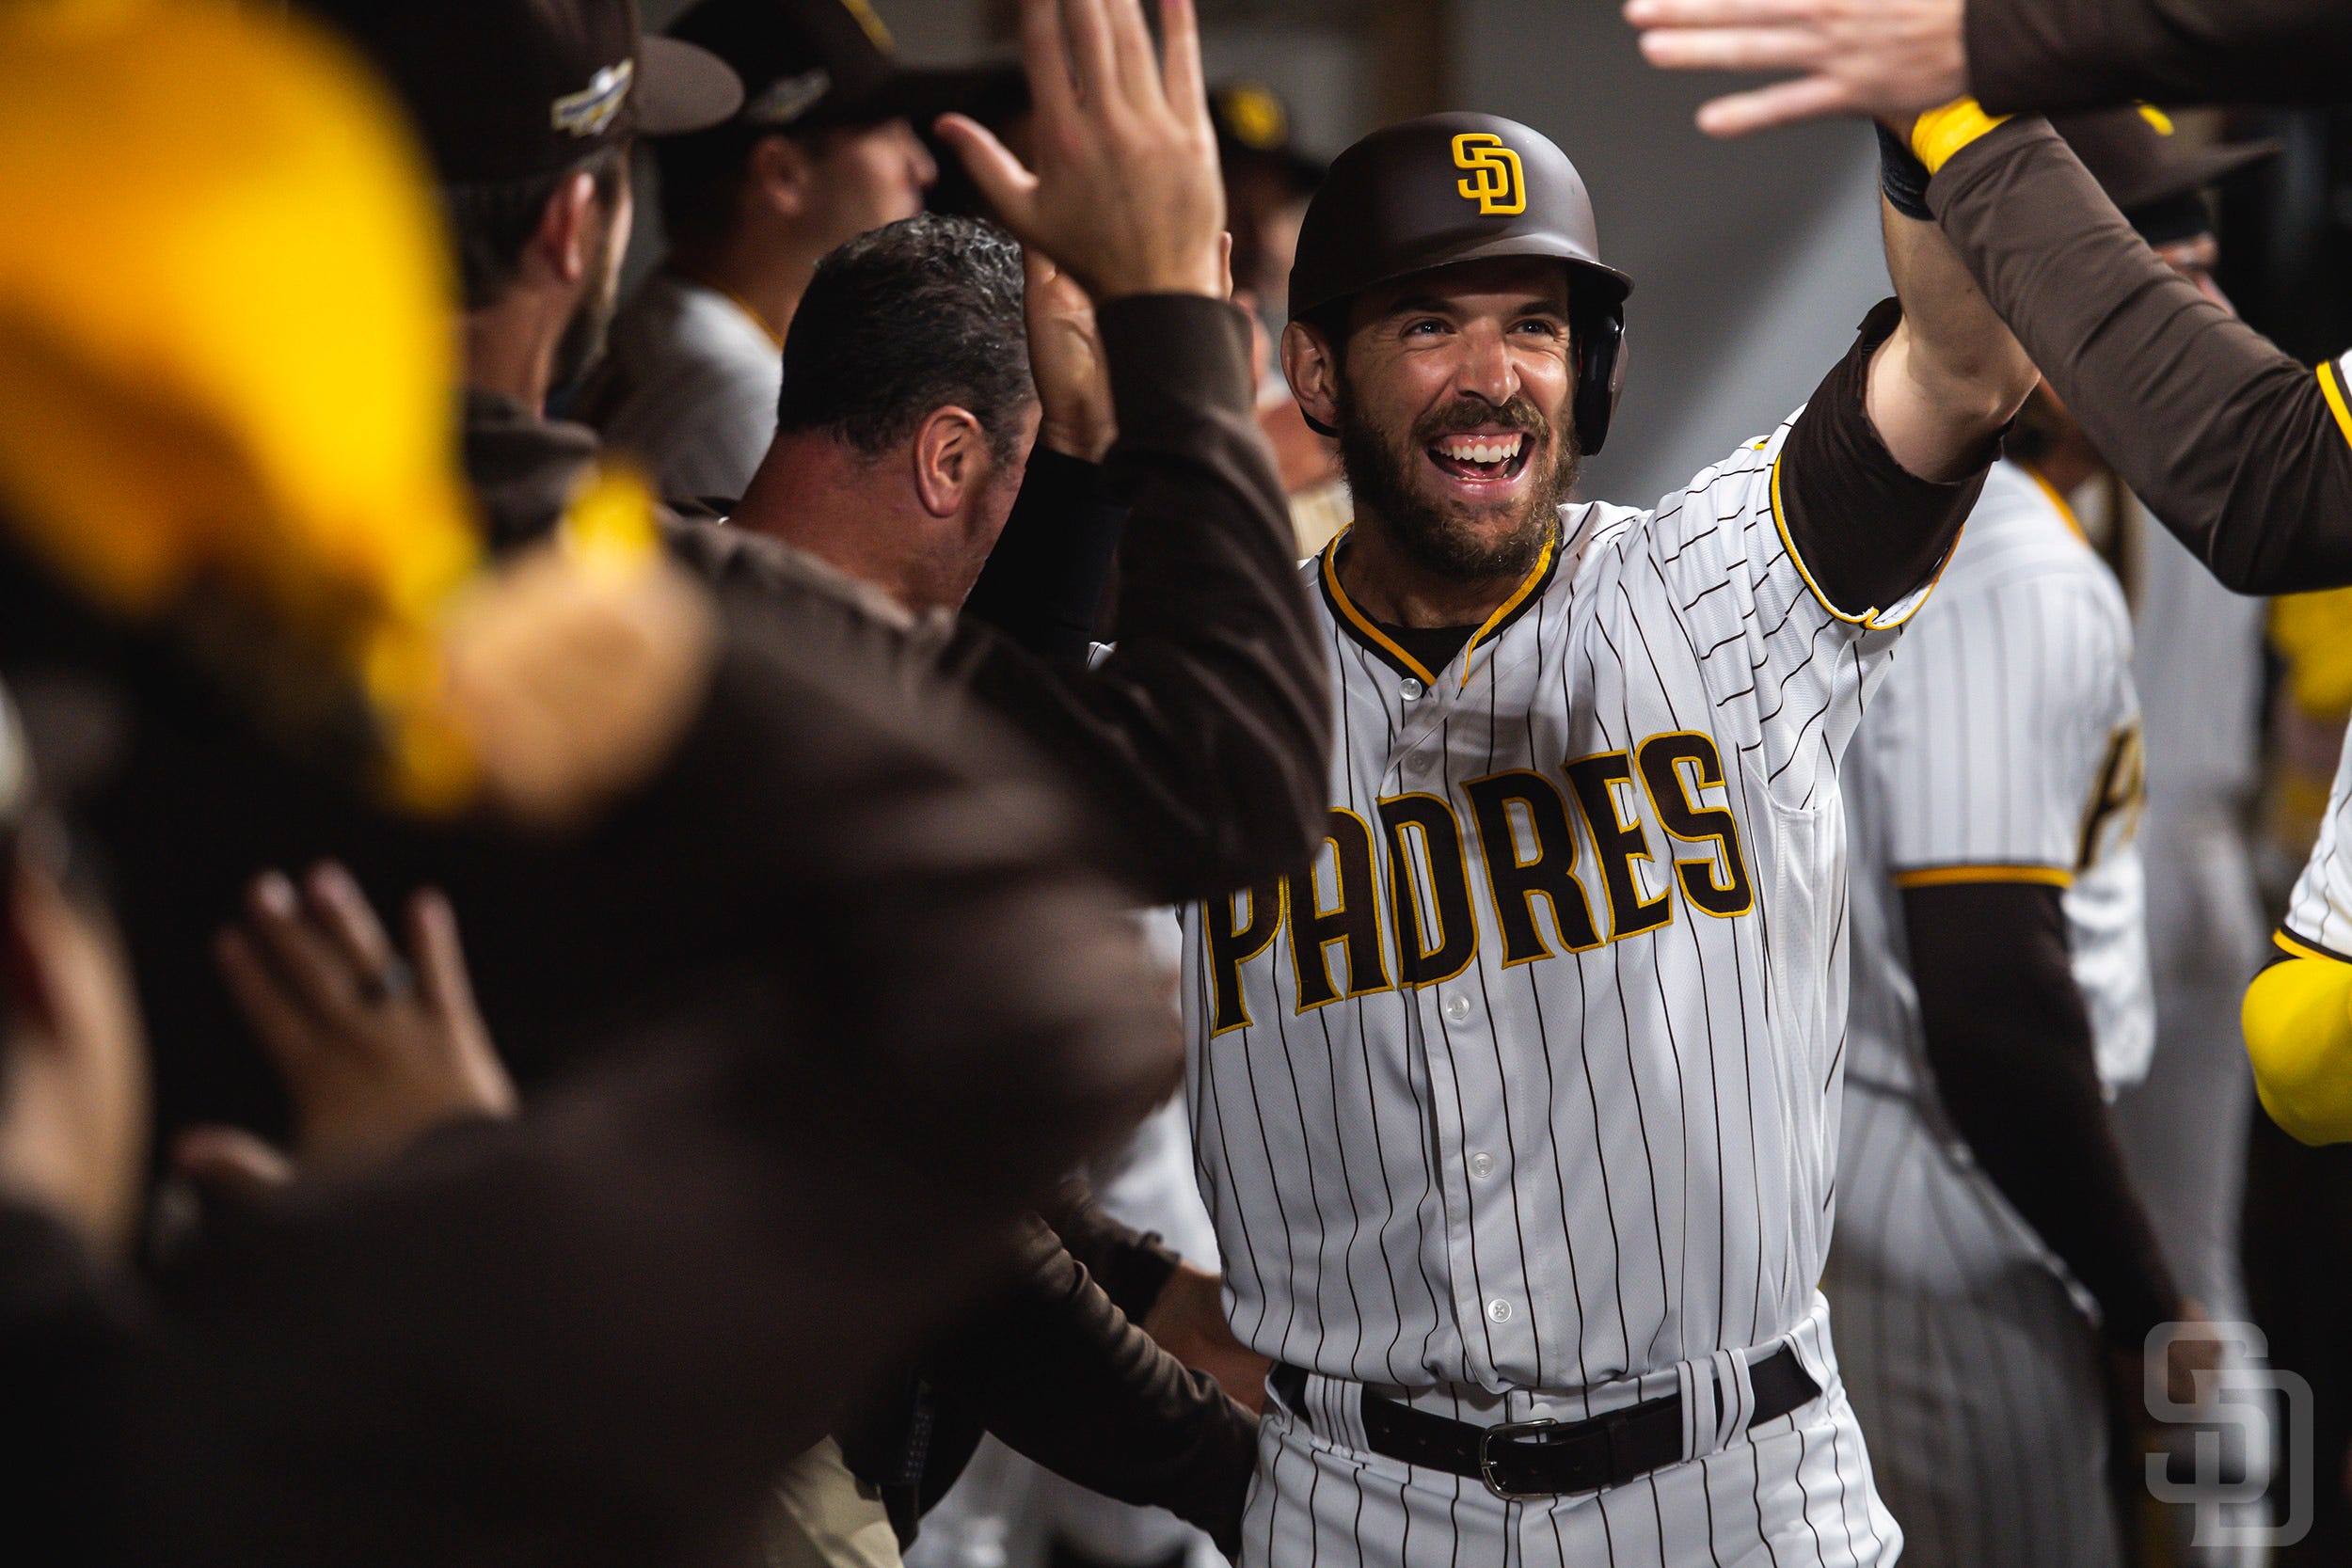 Padres Pics: Padres defeat Dodgers to move onto NLCS - FriarWire